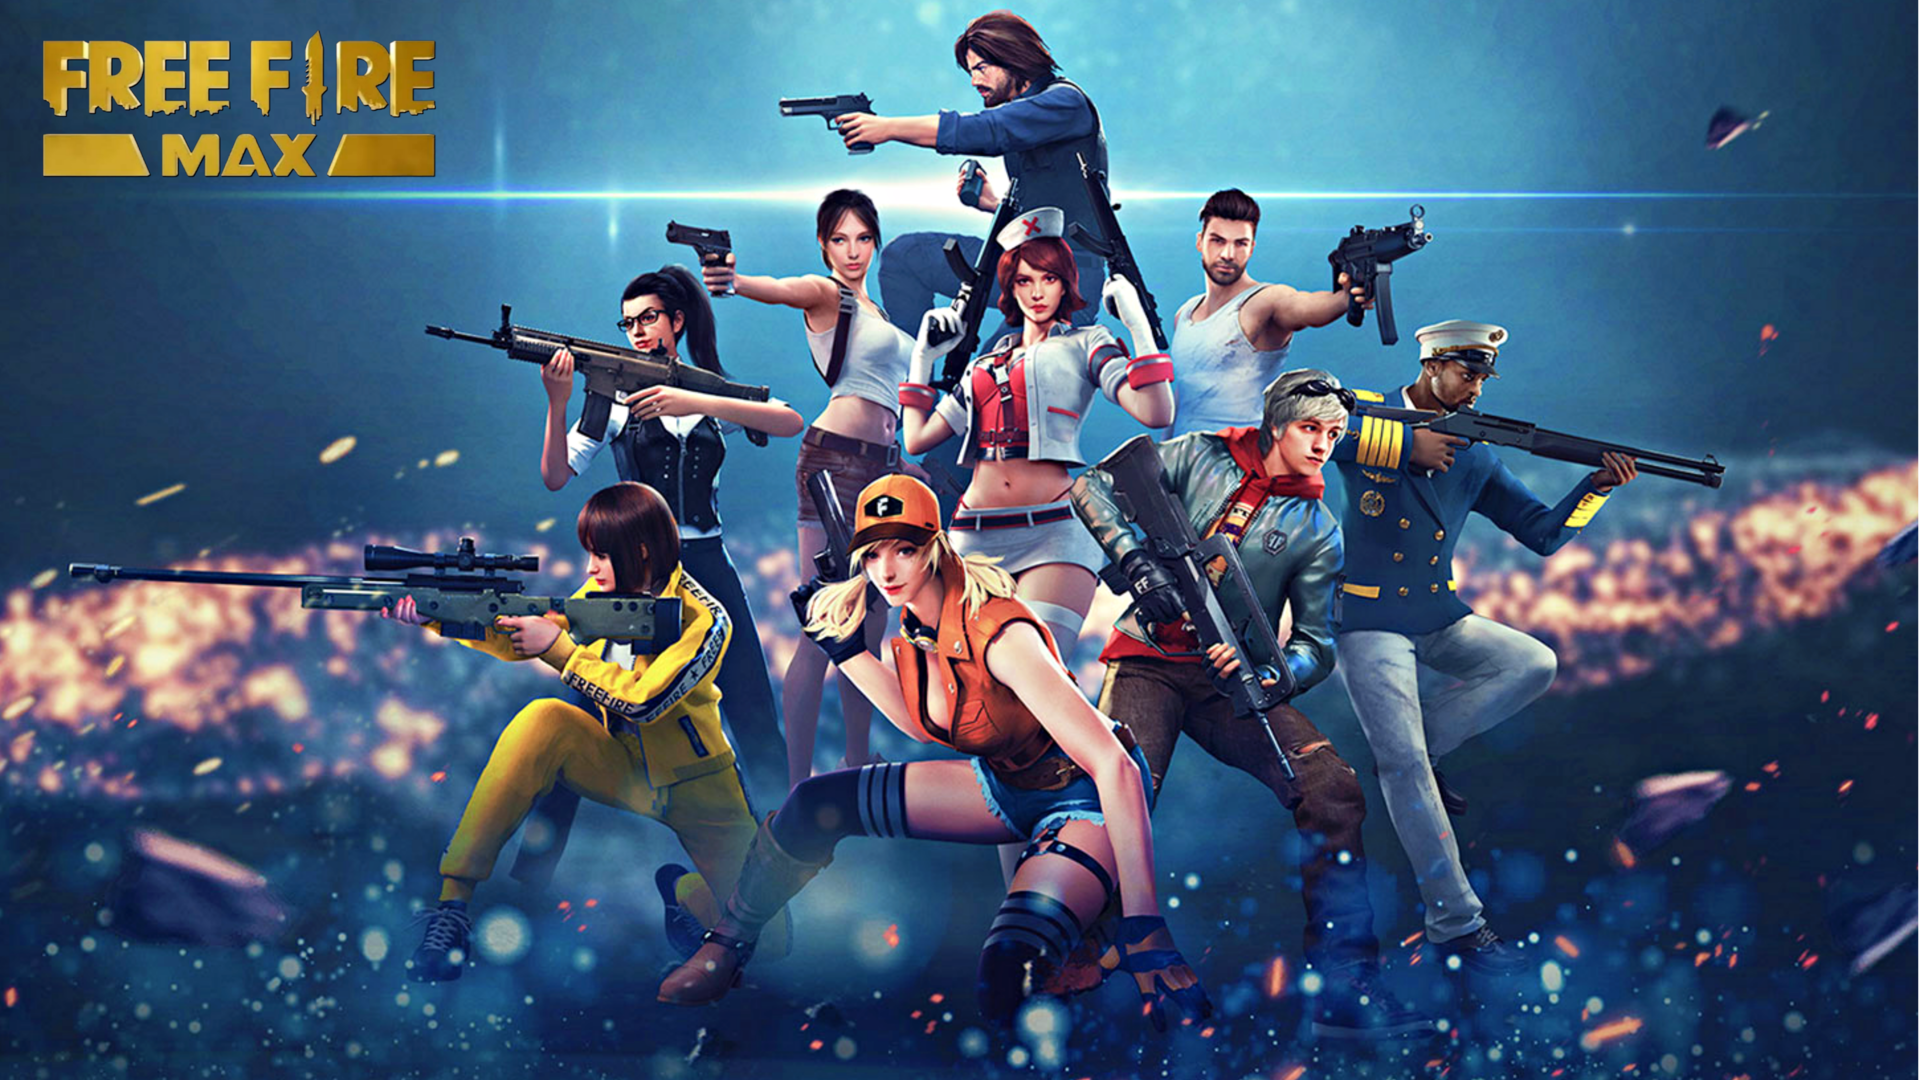 How to redeem Free Fire MAX codes for April 28